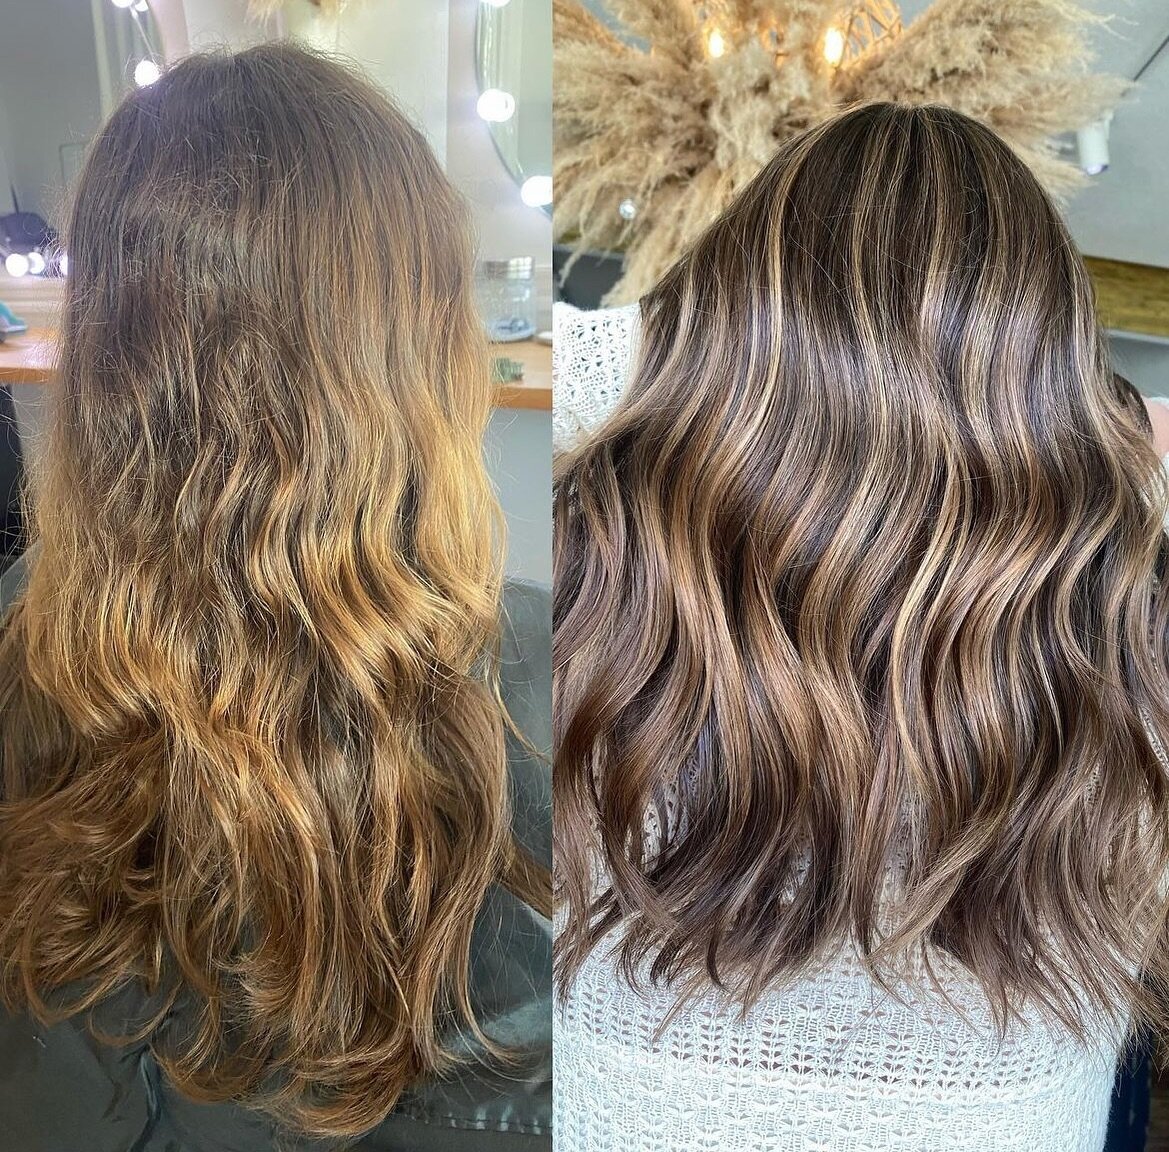 Soft, natural, + dimensional... The perfect combo! @summeranneshultz nailed this transformation!!🤩👏🏼

#pslhairstylist #verobeach #stuarthairstylist #behindthechair